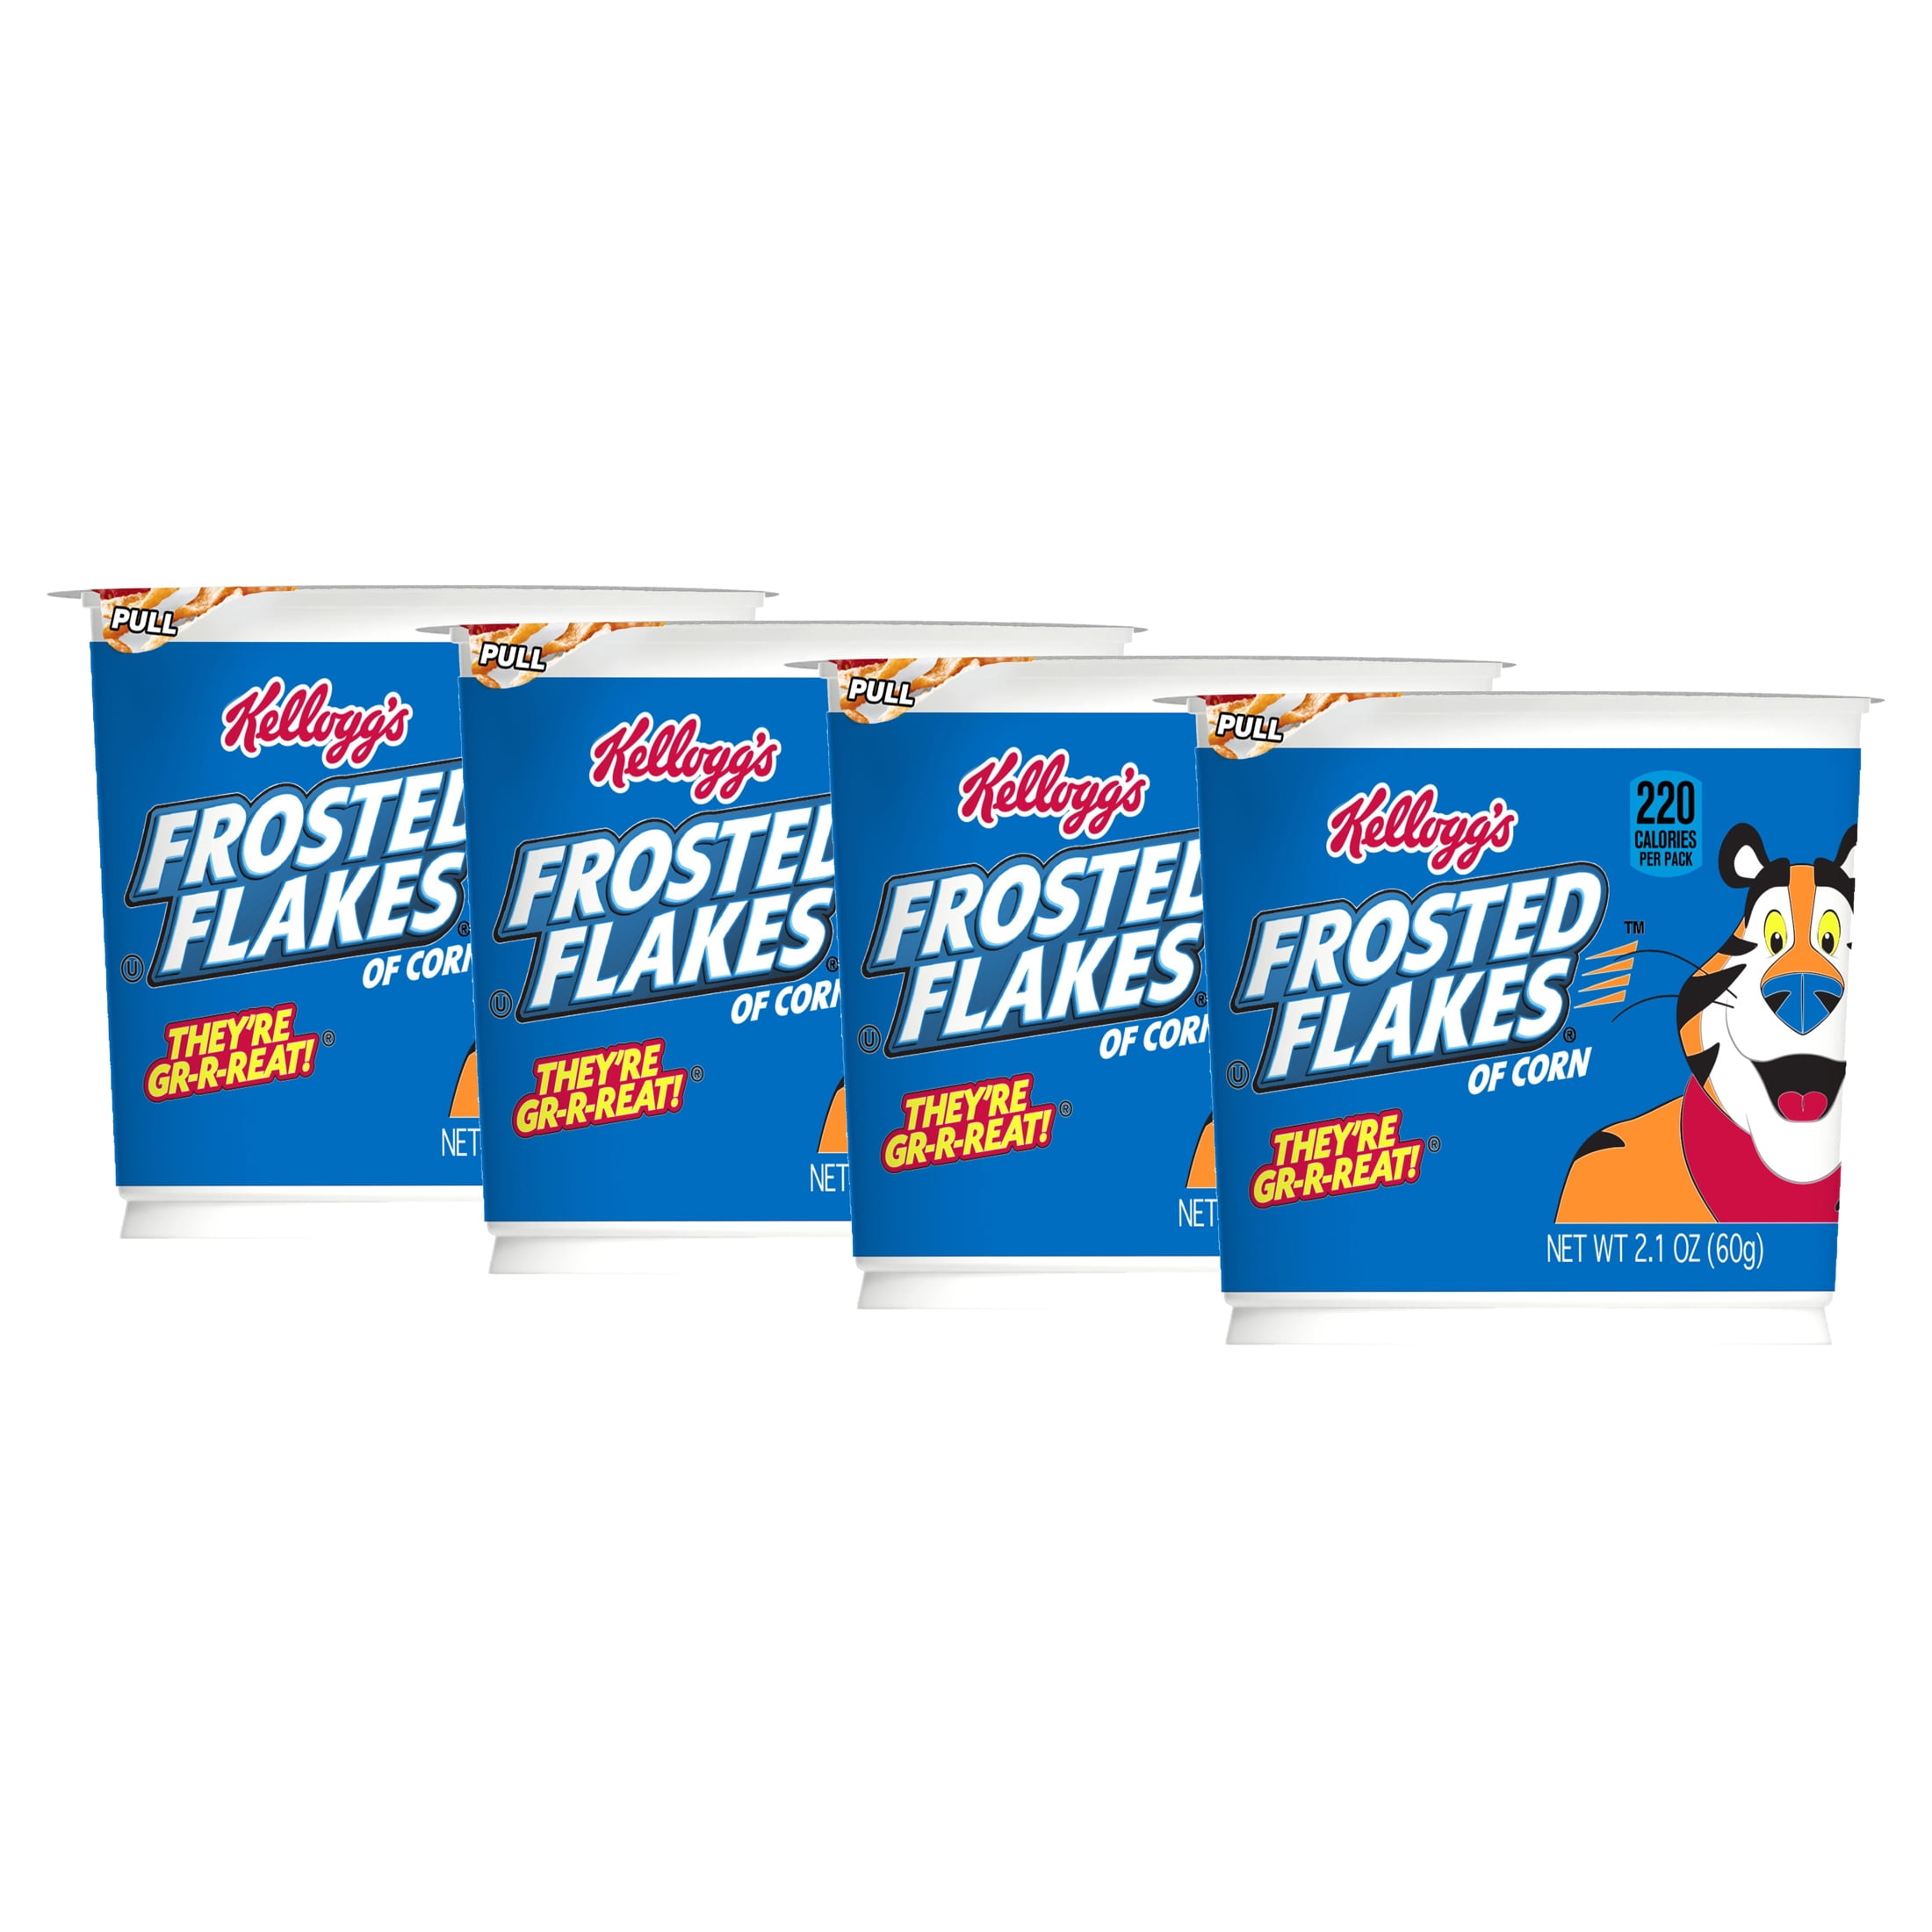 Kellogg's Frosted Flakes Original Cold Breakfast Cereal, 2.1 oz